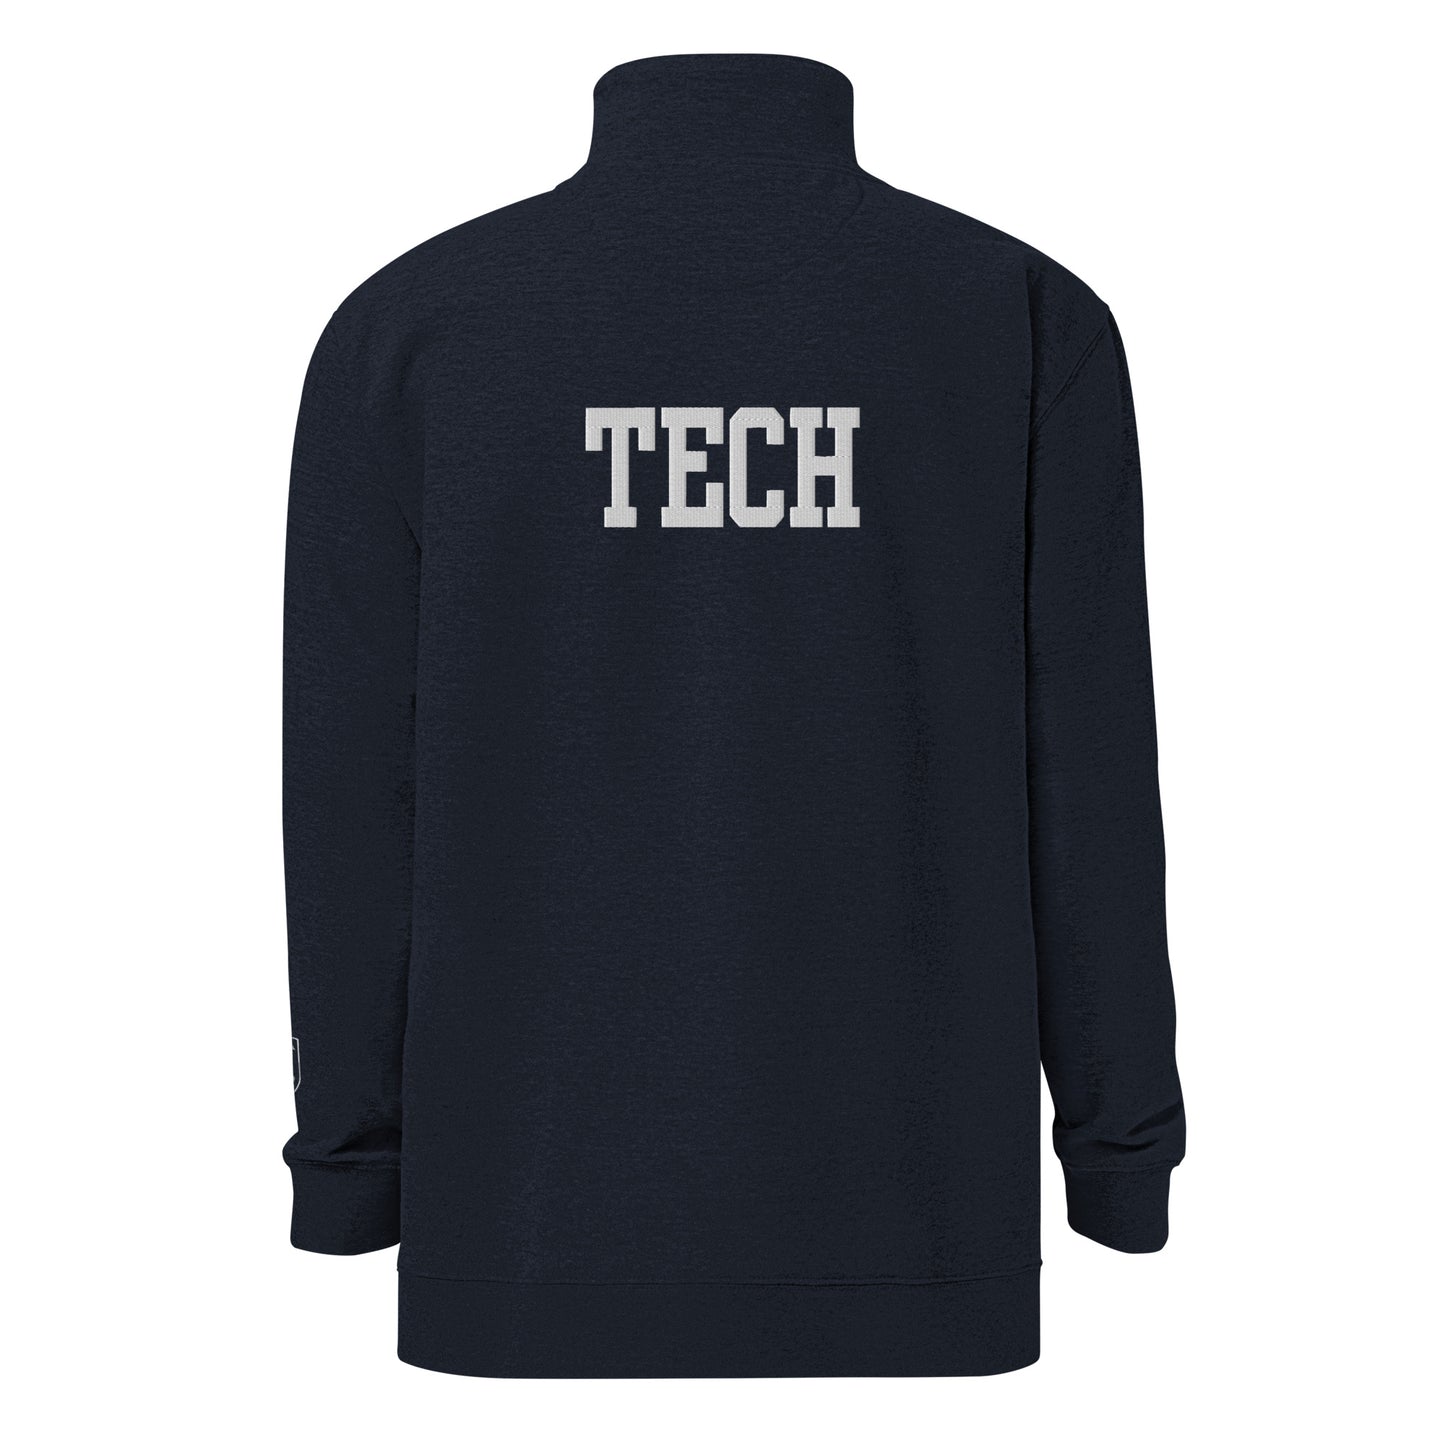 Embroidered Men's Fleece Pullover - Class Of 1990